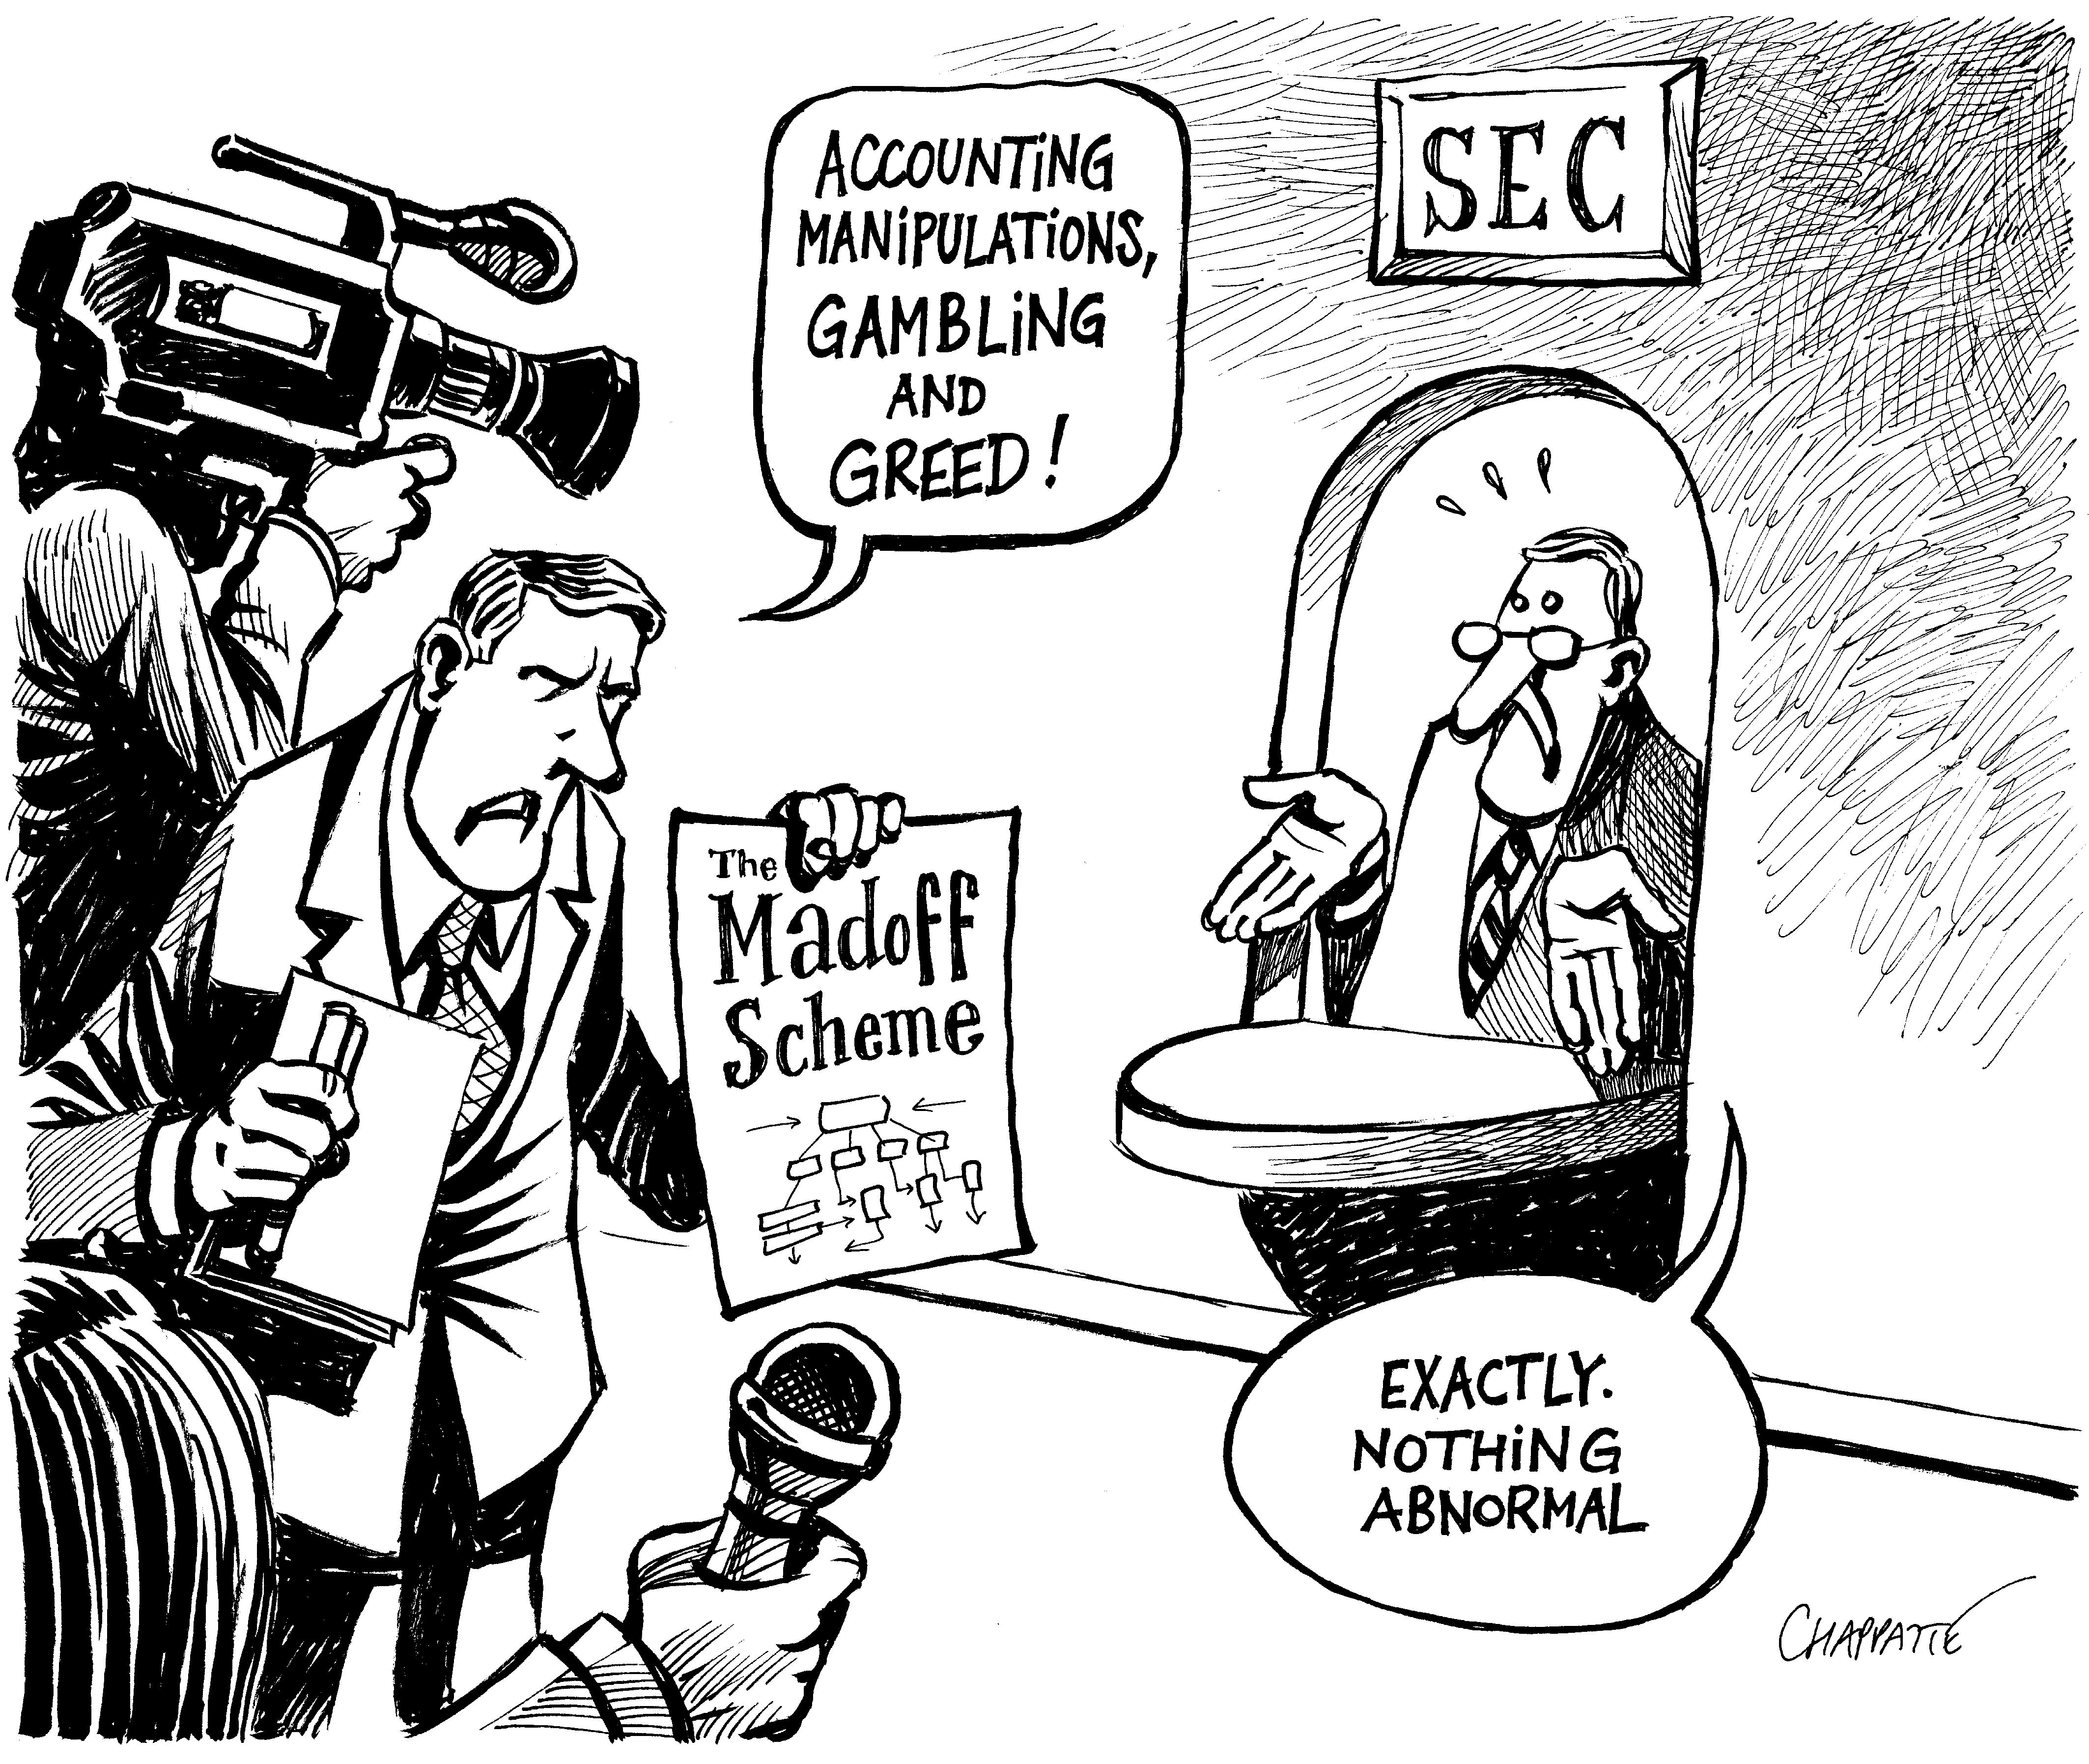 Madoff: The SEC saw nothing